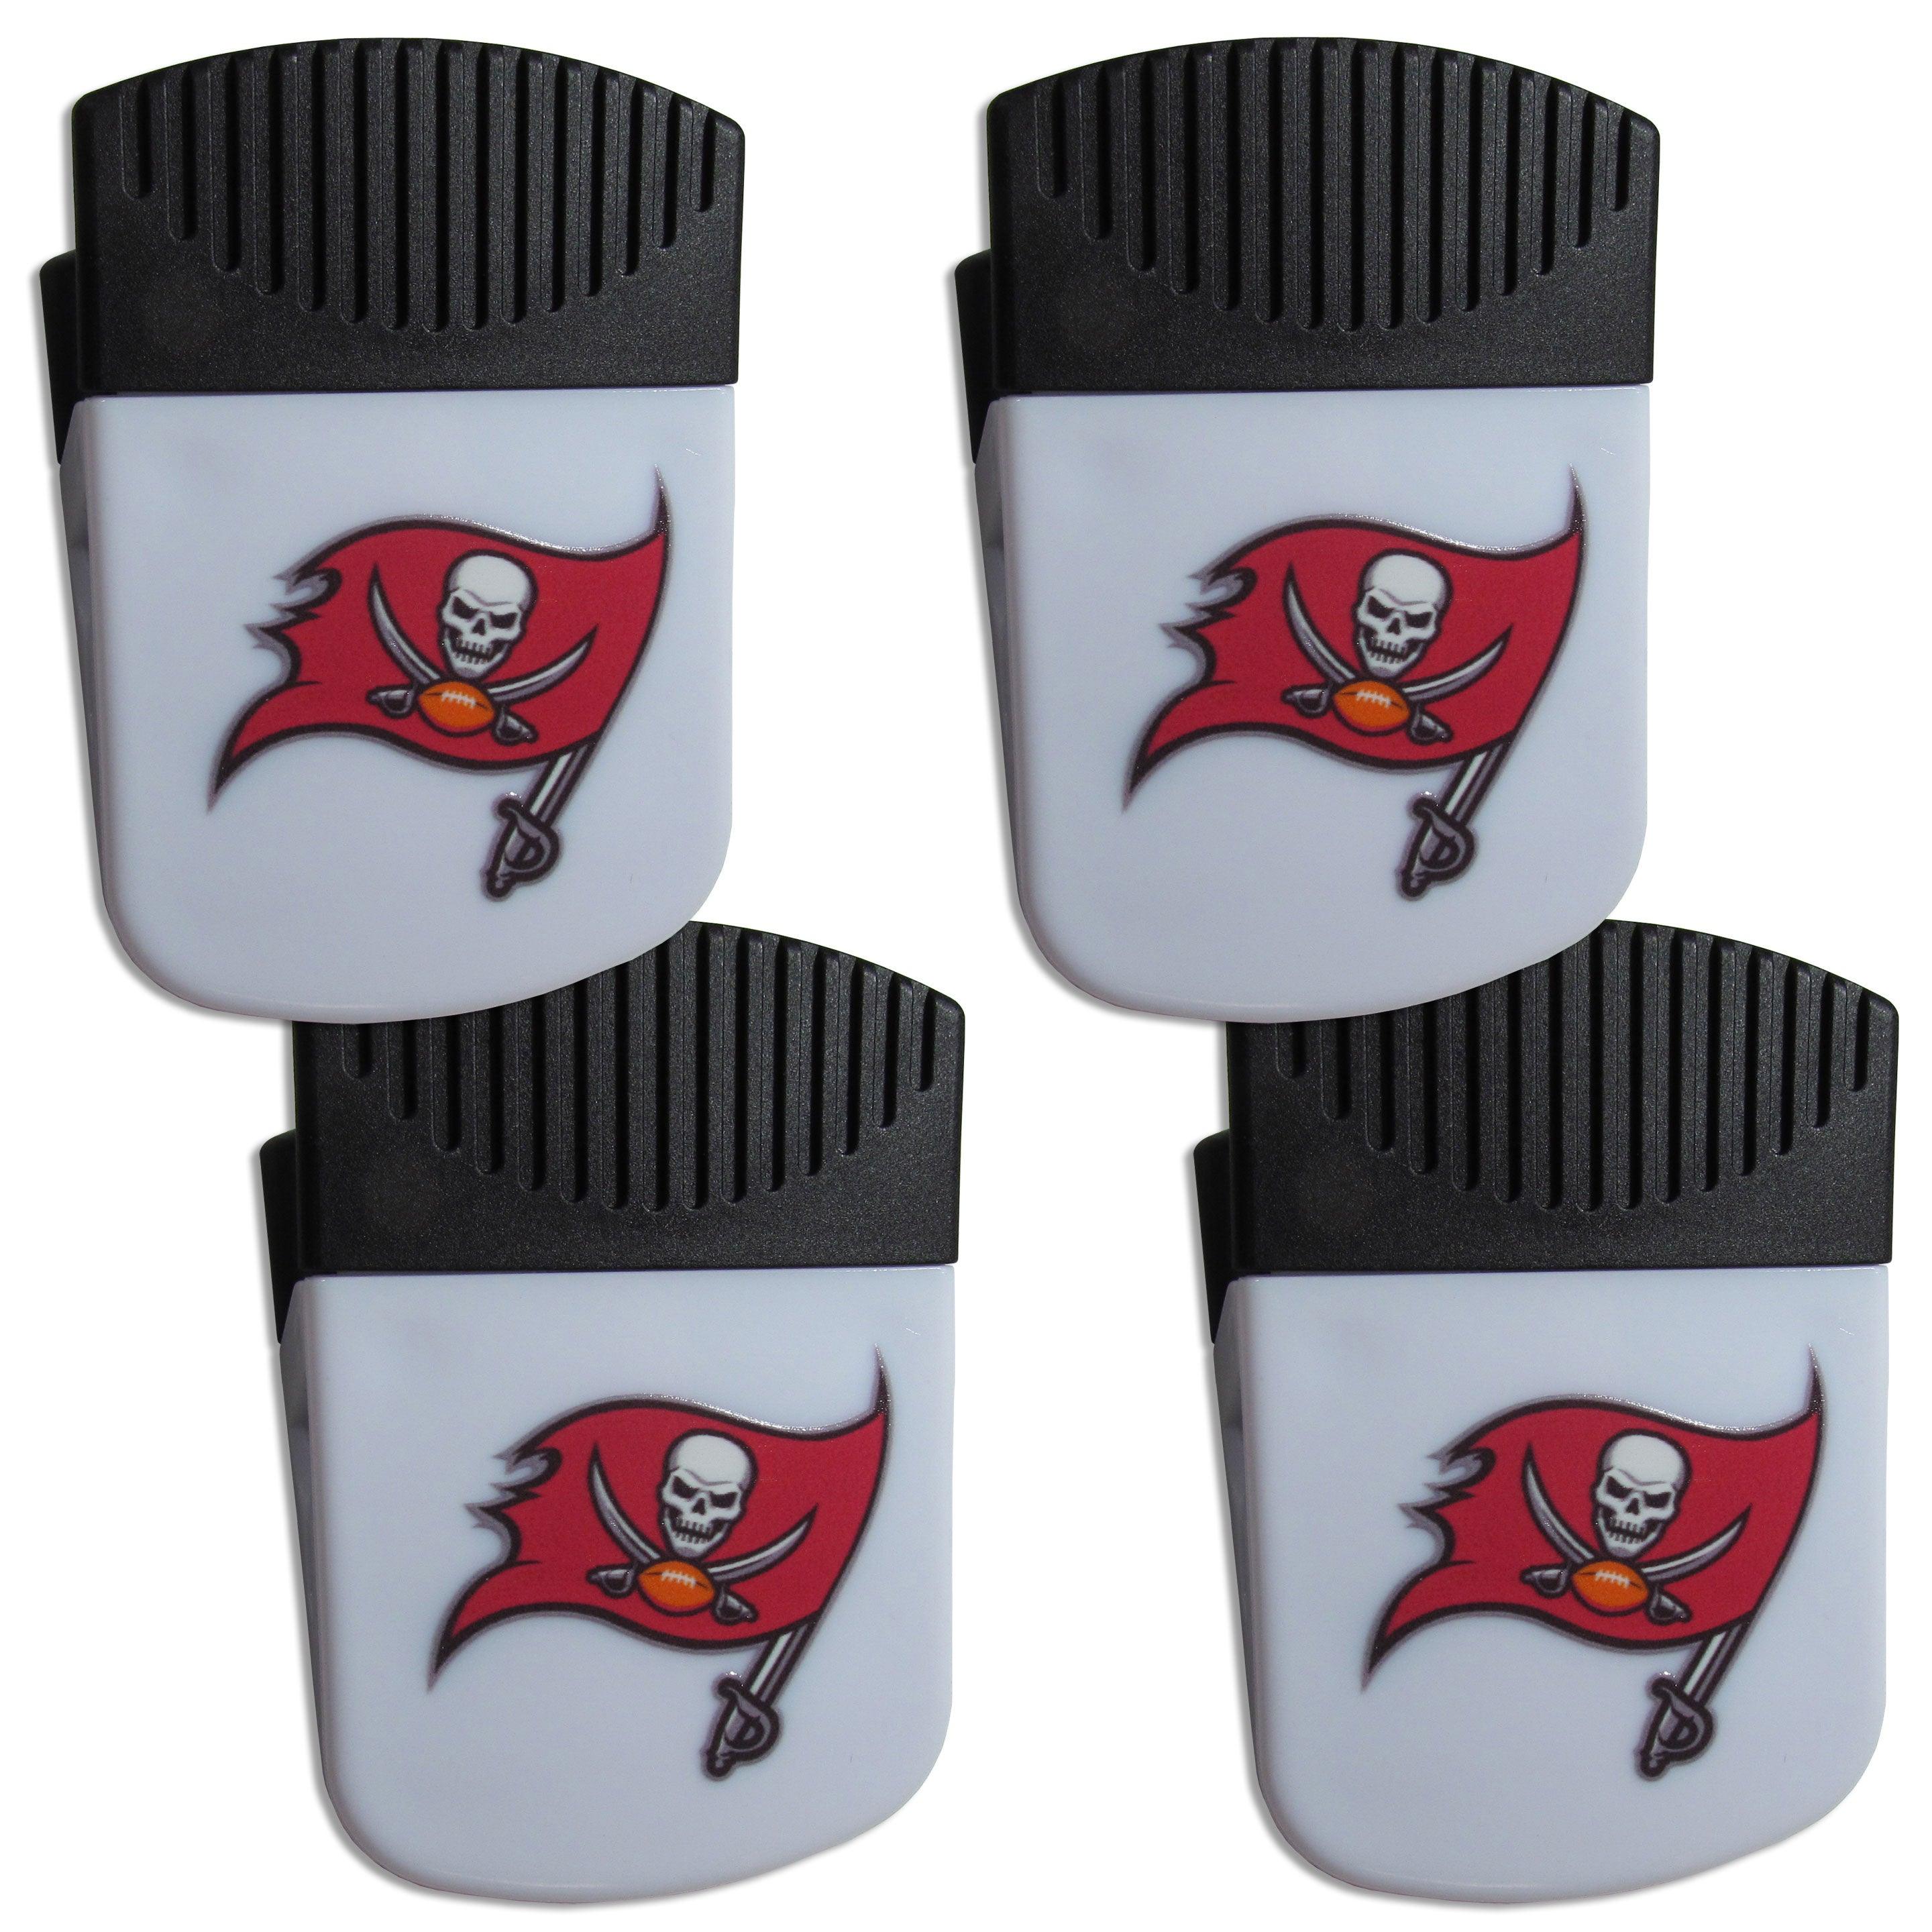 Tampa Bay Buccaneers Chip Clip Magnet with Bottle Opener, 4 pack - Flyclothing LLC